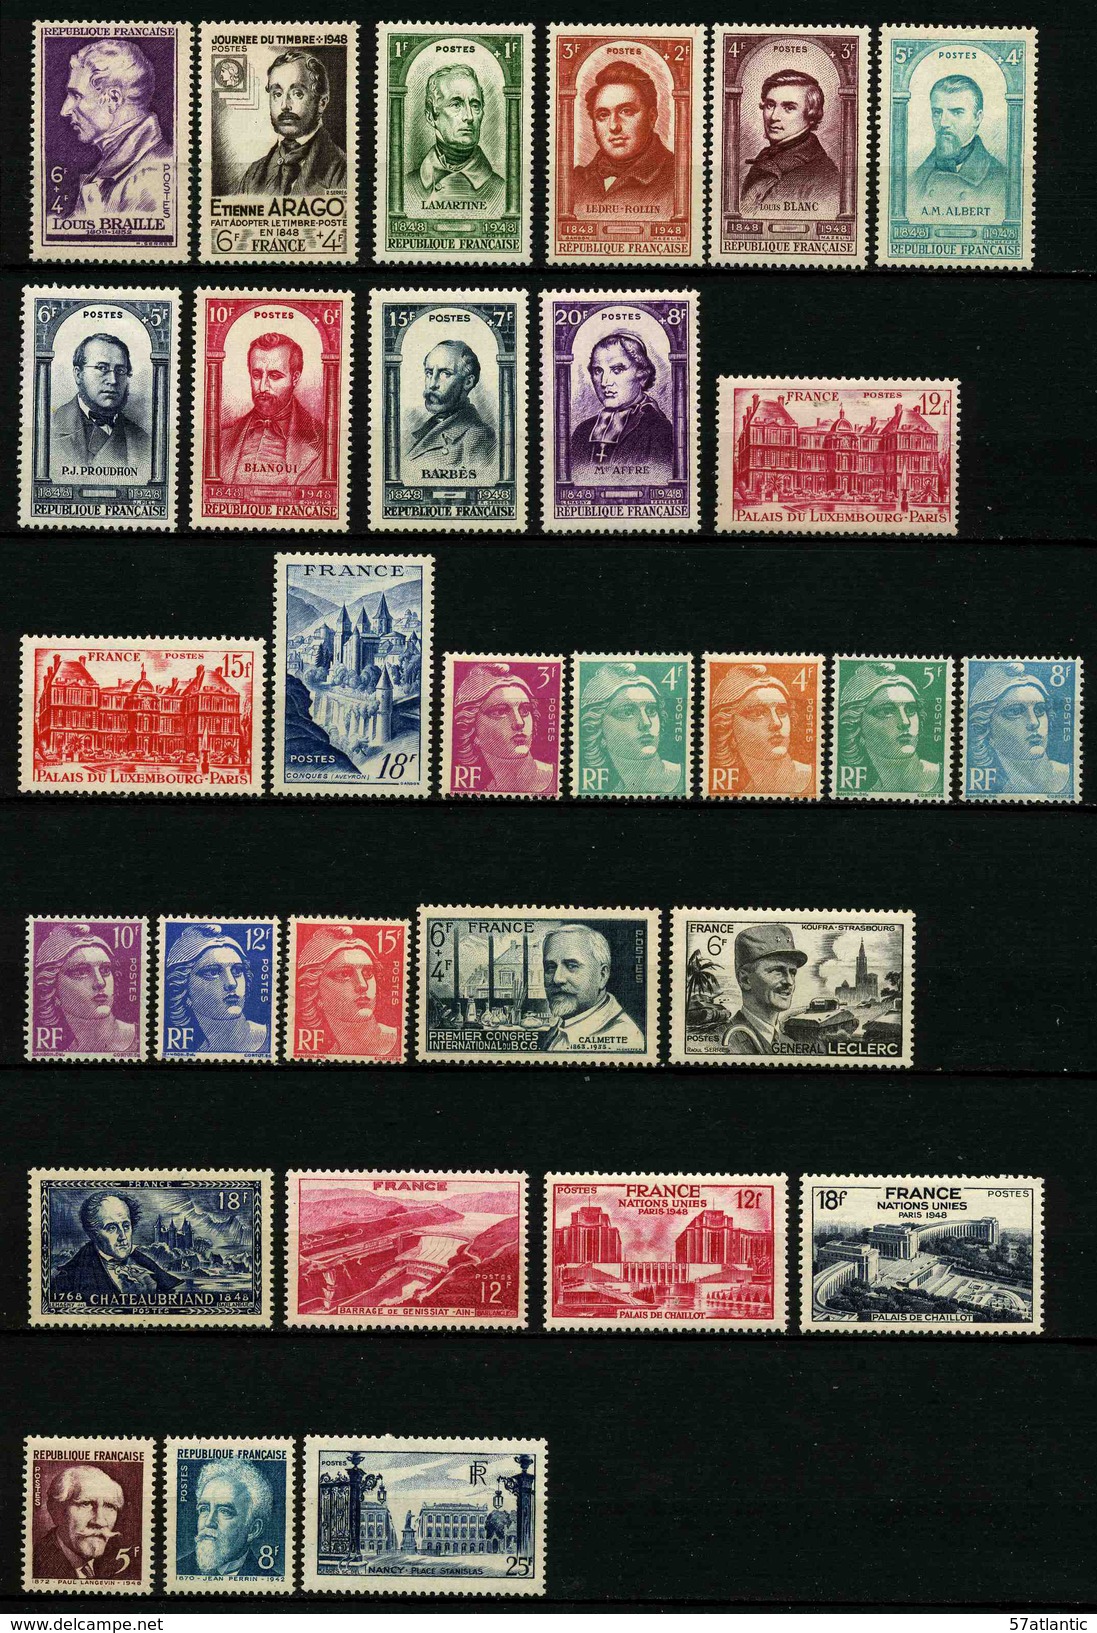 FRANCE - ANNEE COMPLETE 1948 - YT 793 à 822 ** - 30 TIMBRES NEUFS ** - 1940-1949